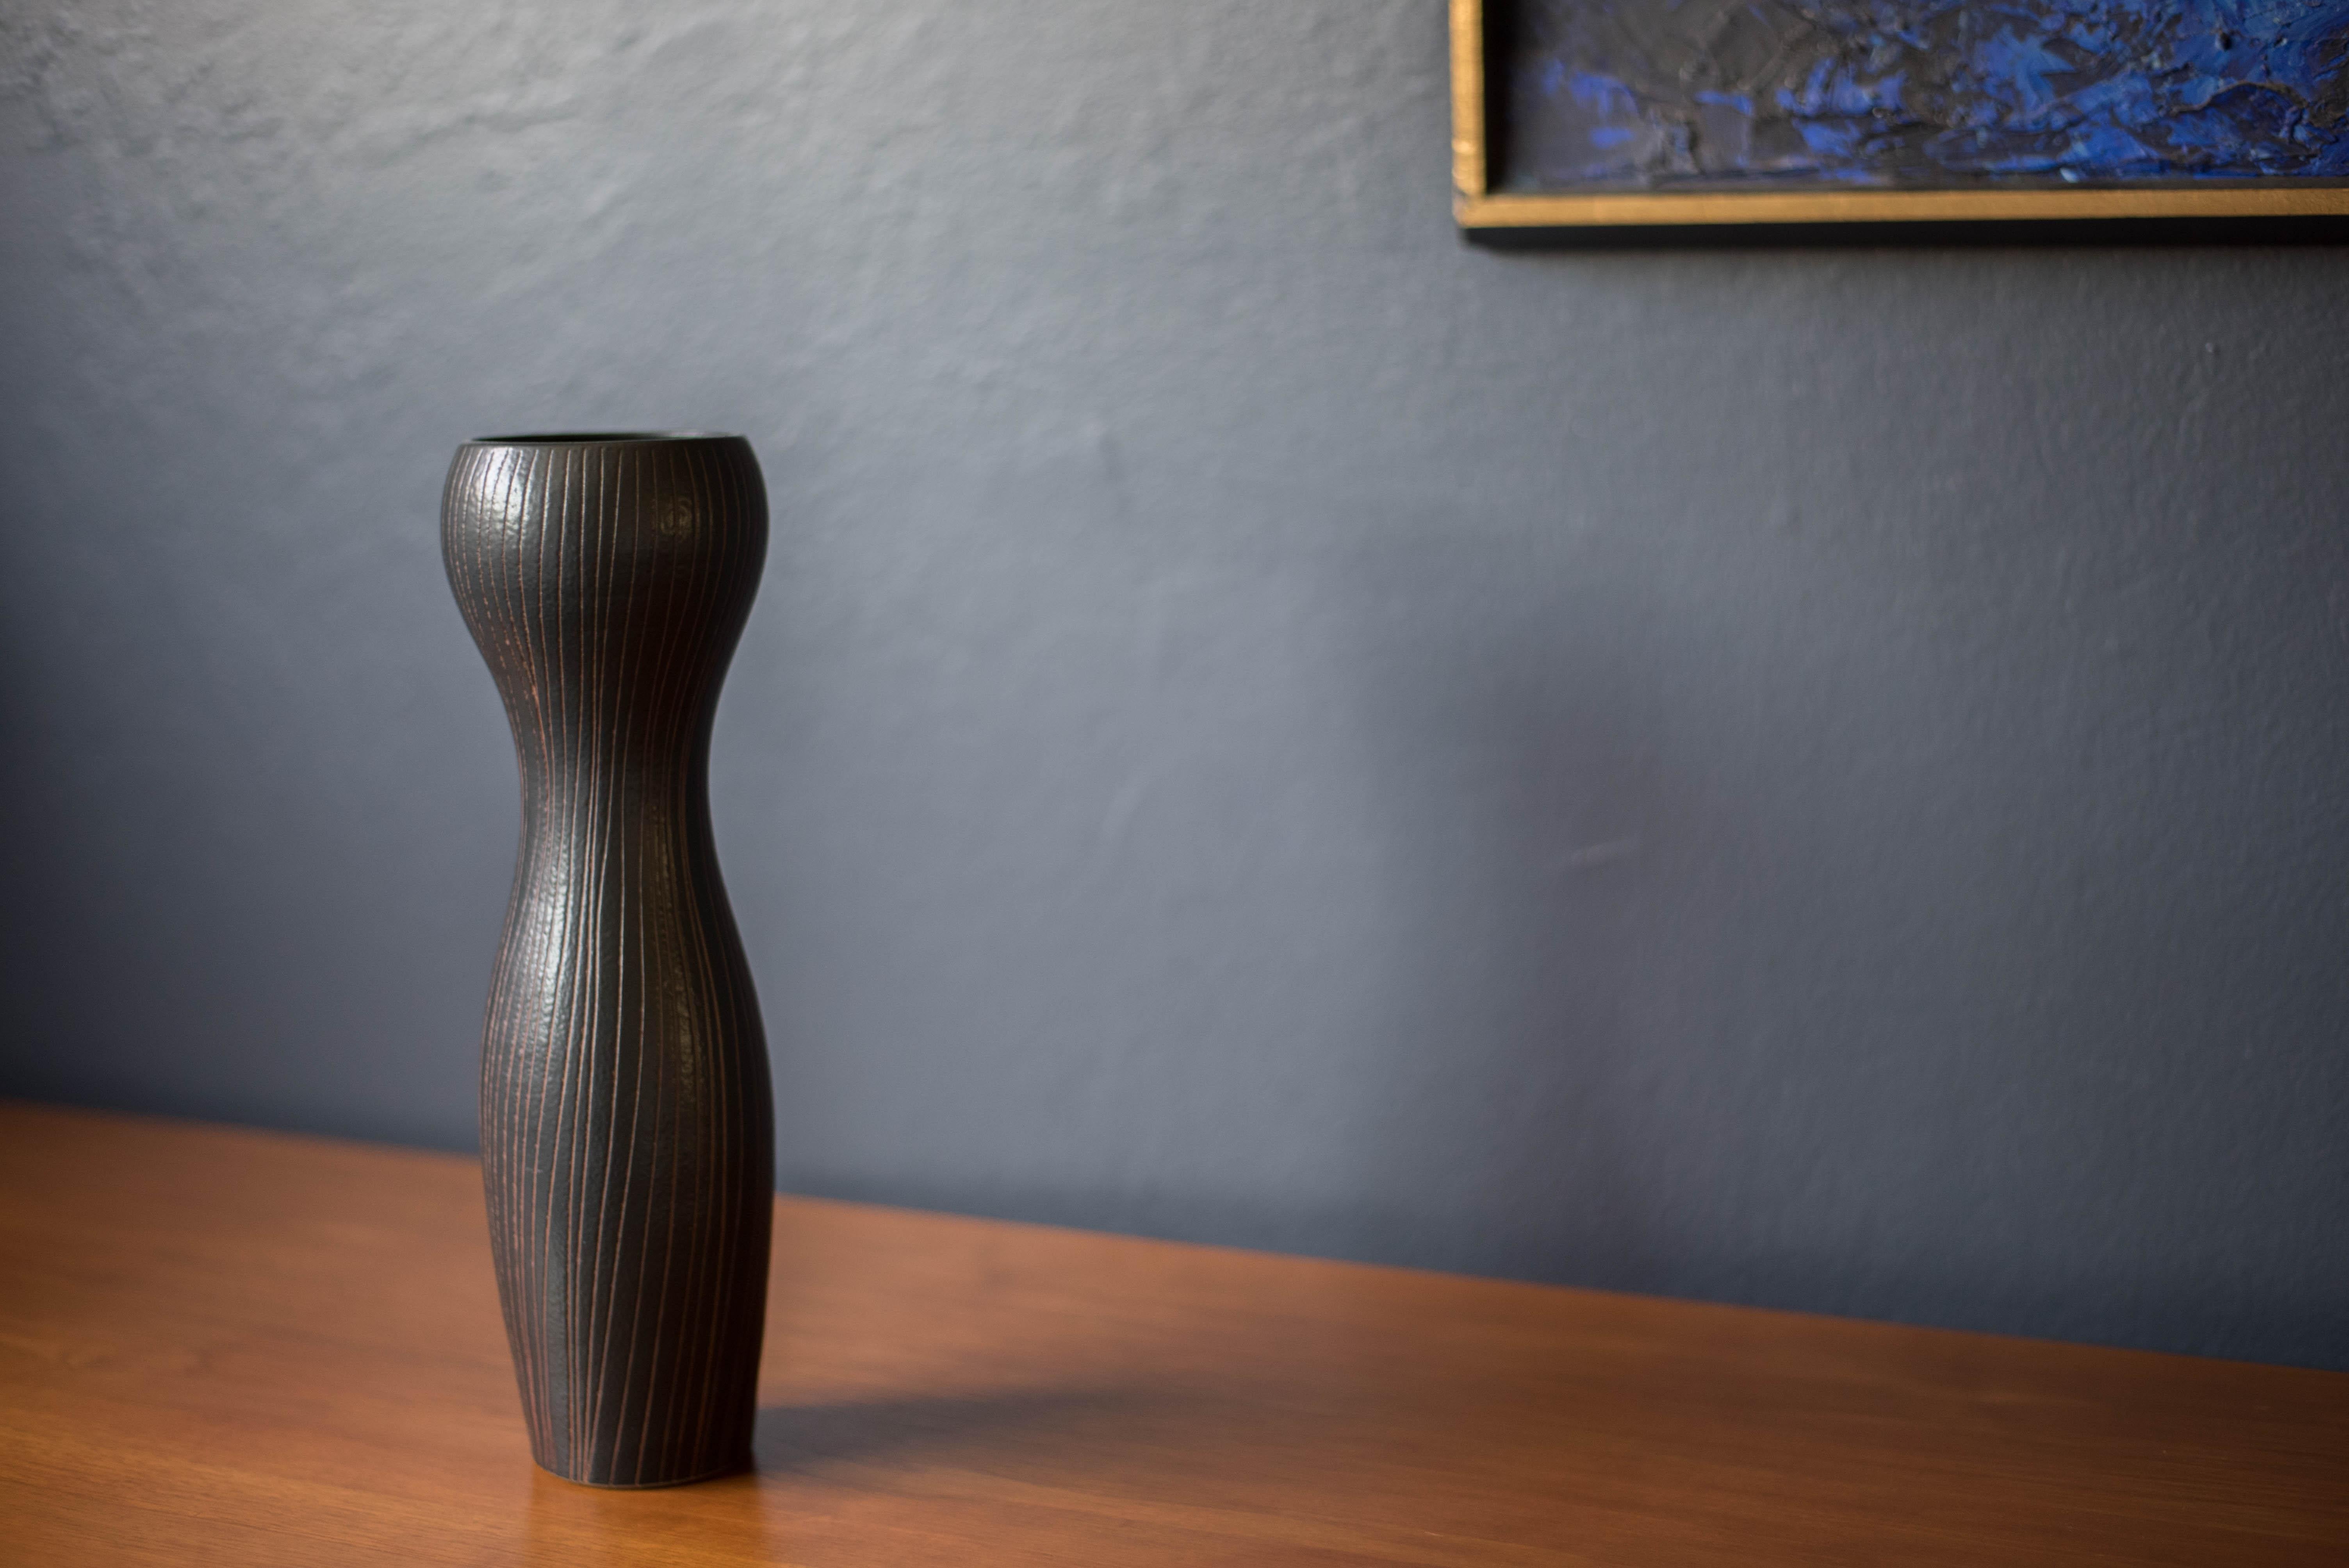 Mid-Century Modern ceramic pottery vase by Otagiri Mercantile Company, circa 1960s. This unique vessel features a sculptural stoneware shape with natural decorative incising in a matte black finish.